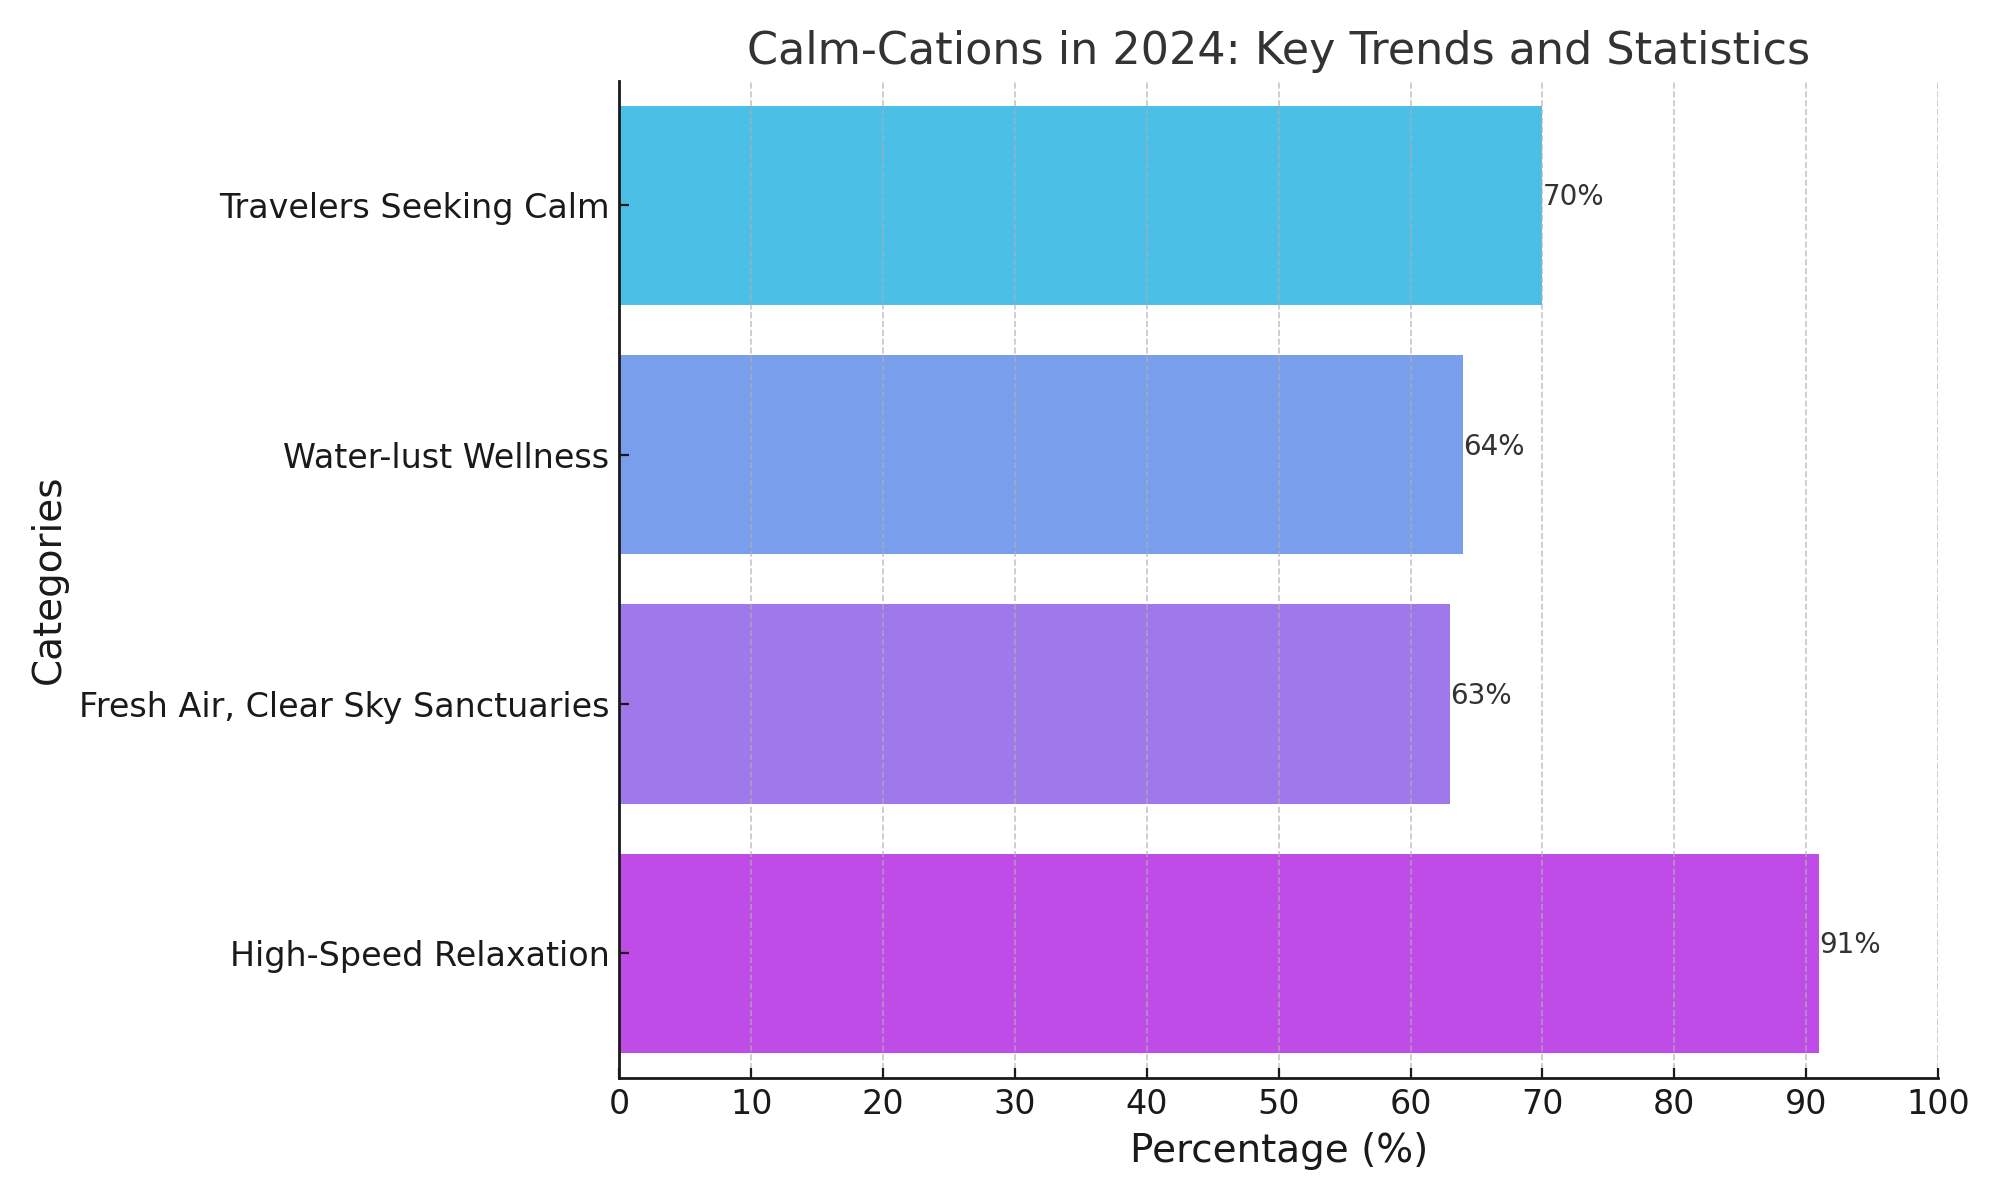 Bar chart infographic titled 'Calm-Cations in 2024: Key Trends and Statistics'. It visually represents four categories with corresponding percentages: 'Travelers Seeking Calm' at 70%, illustrating the proportion of travelers looking for calm and relaxation; 'Water-lust Wellness' at 64%, showing the percentage of travelers who prefer being near natural water bodies; 'Fresh Air, Clear Sky Sanctuaries' at 63%, indicating those who value fresh air and scenic views; and 'High-Speed Relaxation' at 91%, reflecting the preference for high-speed internet access during calm-cations. The chart uses a cool color palette and is designed to provide a clear, concise overview of the key trends in calm-cations for 2024.